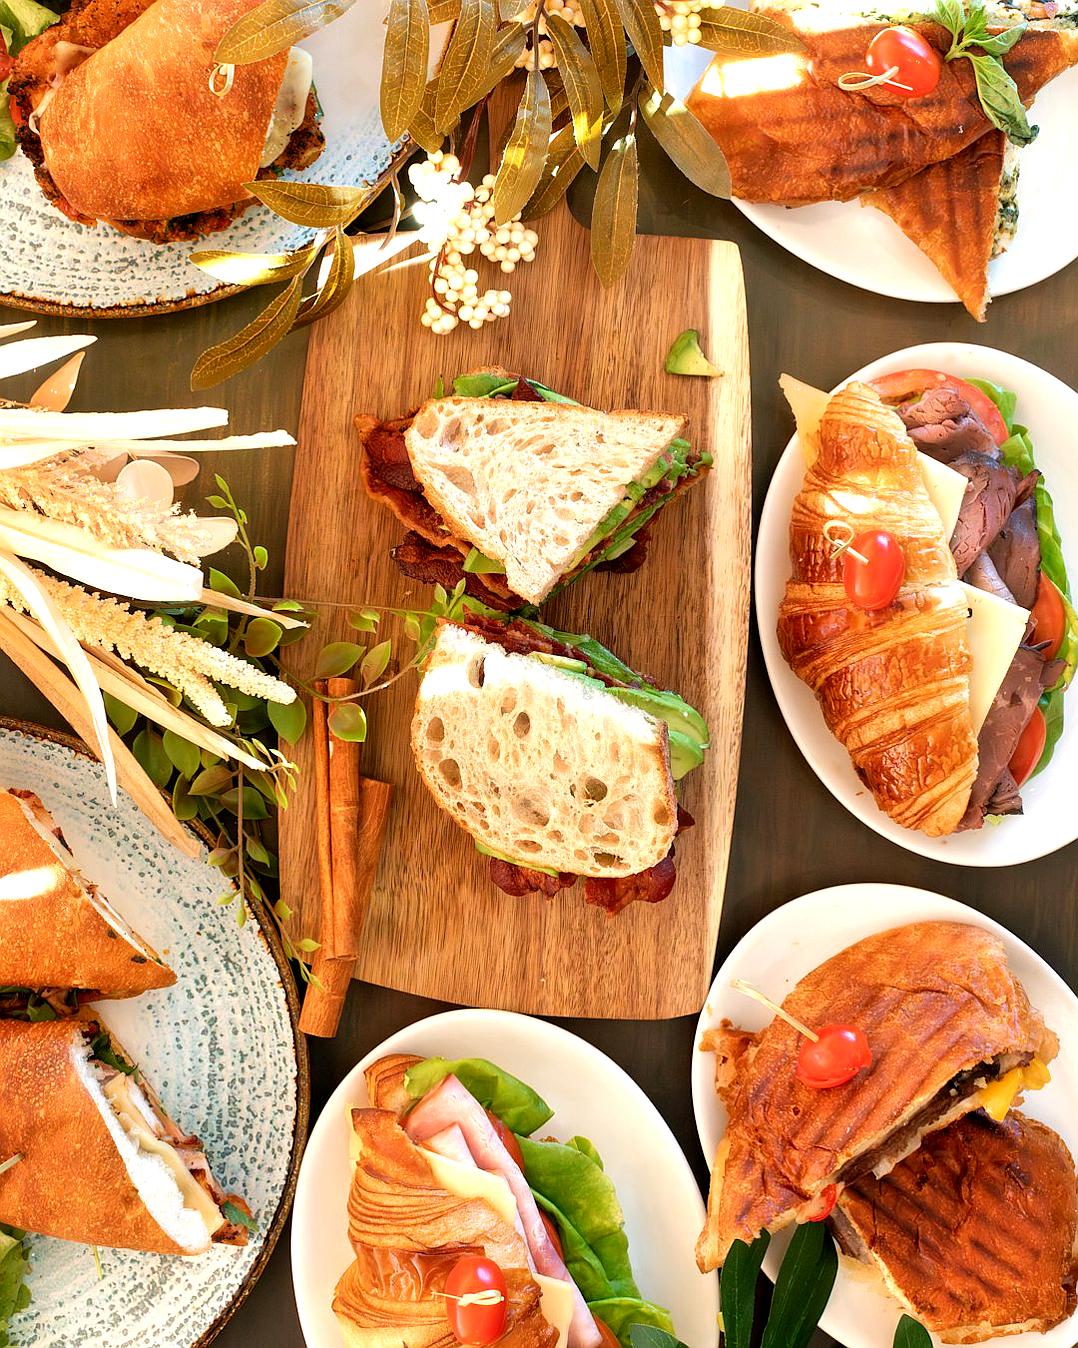 A table set with an assortment of sandwiches, including croissants and paninis on plates. In the center is a wooden board holding two Cuban-style club sandwich slices, and in front there’s one plate featuring sandwiches made from BLT ingredients. The background features greenery, flowers, and a wall behind it. It captures the food beautifully, highlighting its colors and textures. Shot in the style of a professional photographer using a Canon EOS R5 camera with a macro lens for sharp focus.